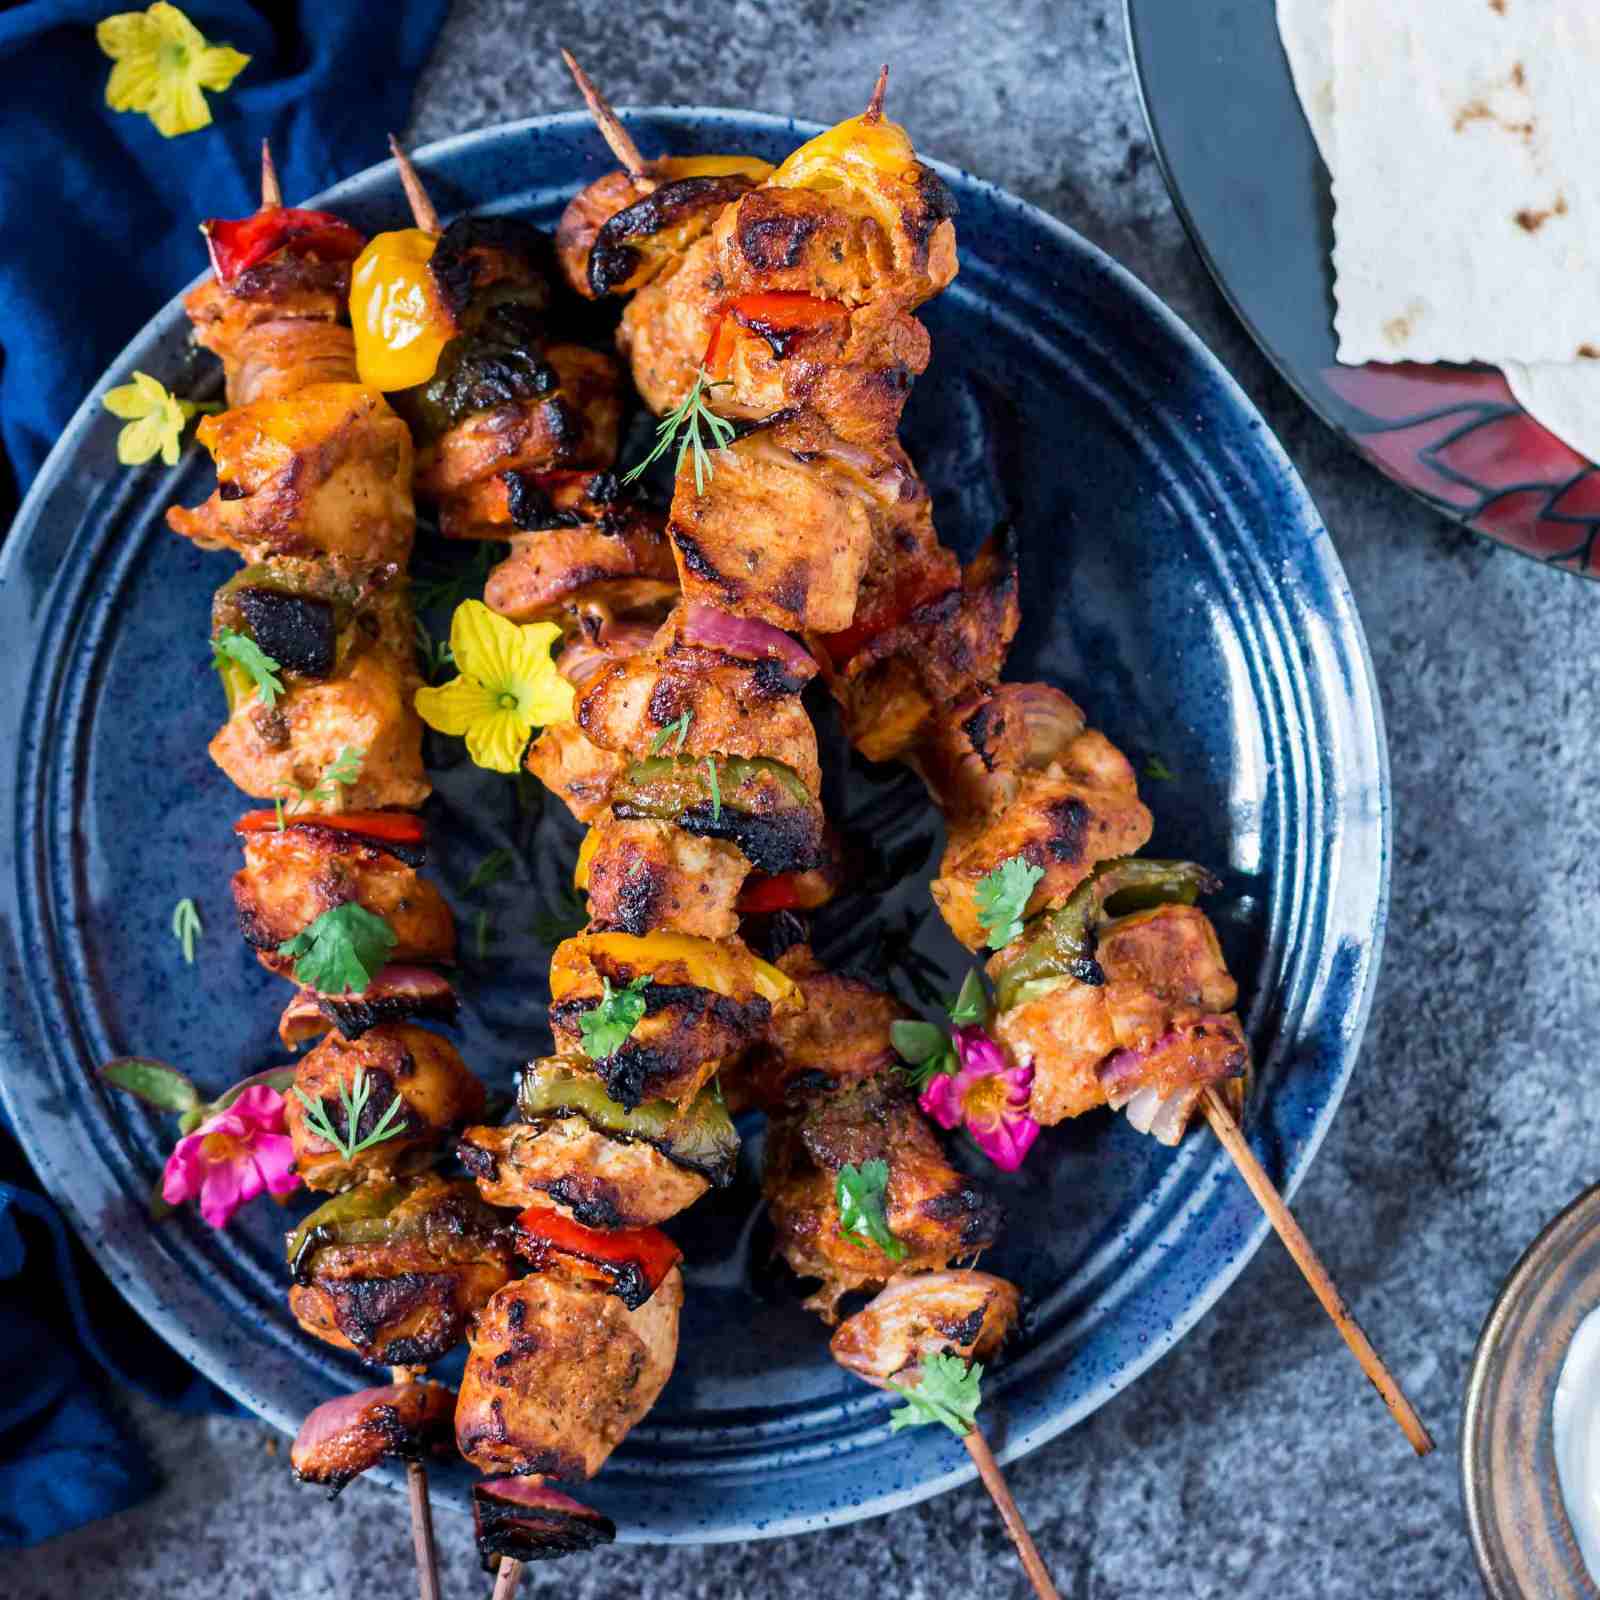 Lebanese Style Shish Tawook Recipe - Grilled Chicken Skewers